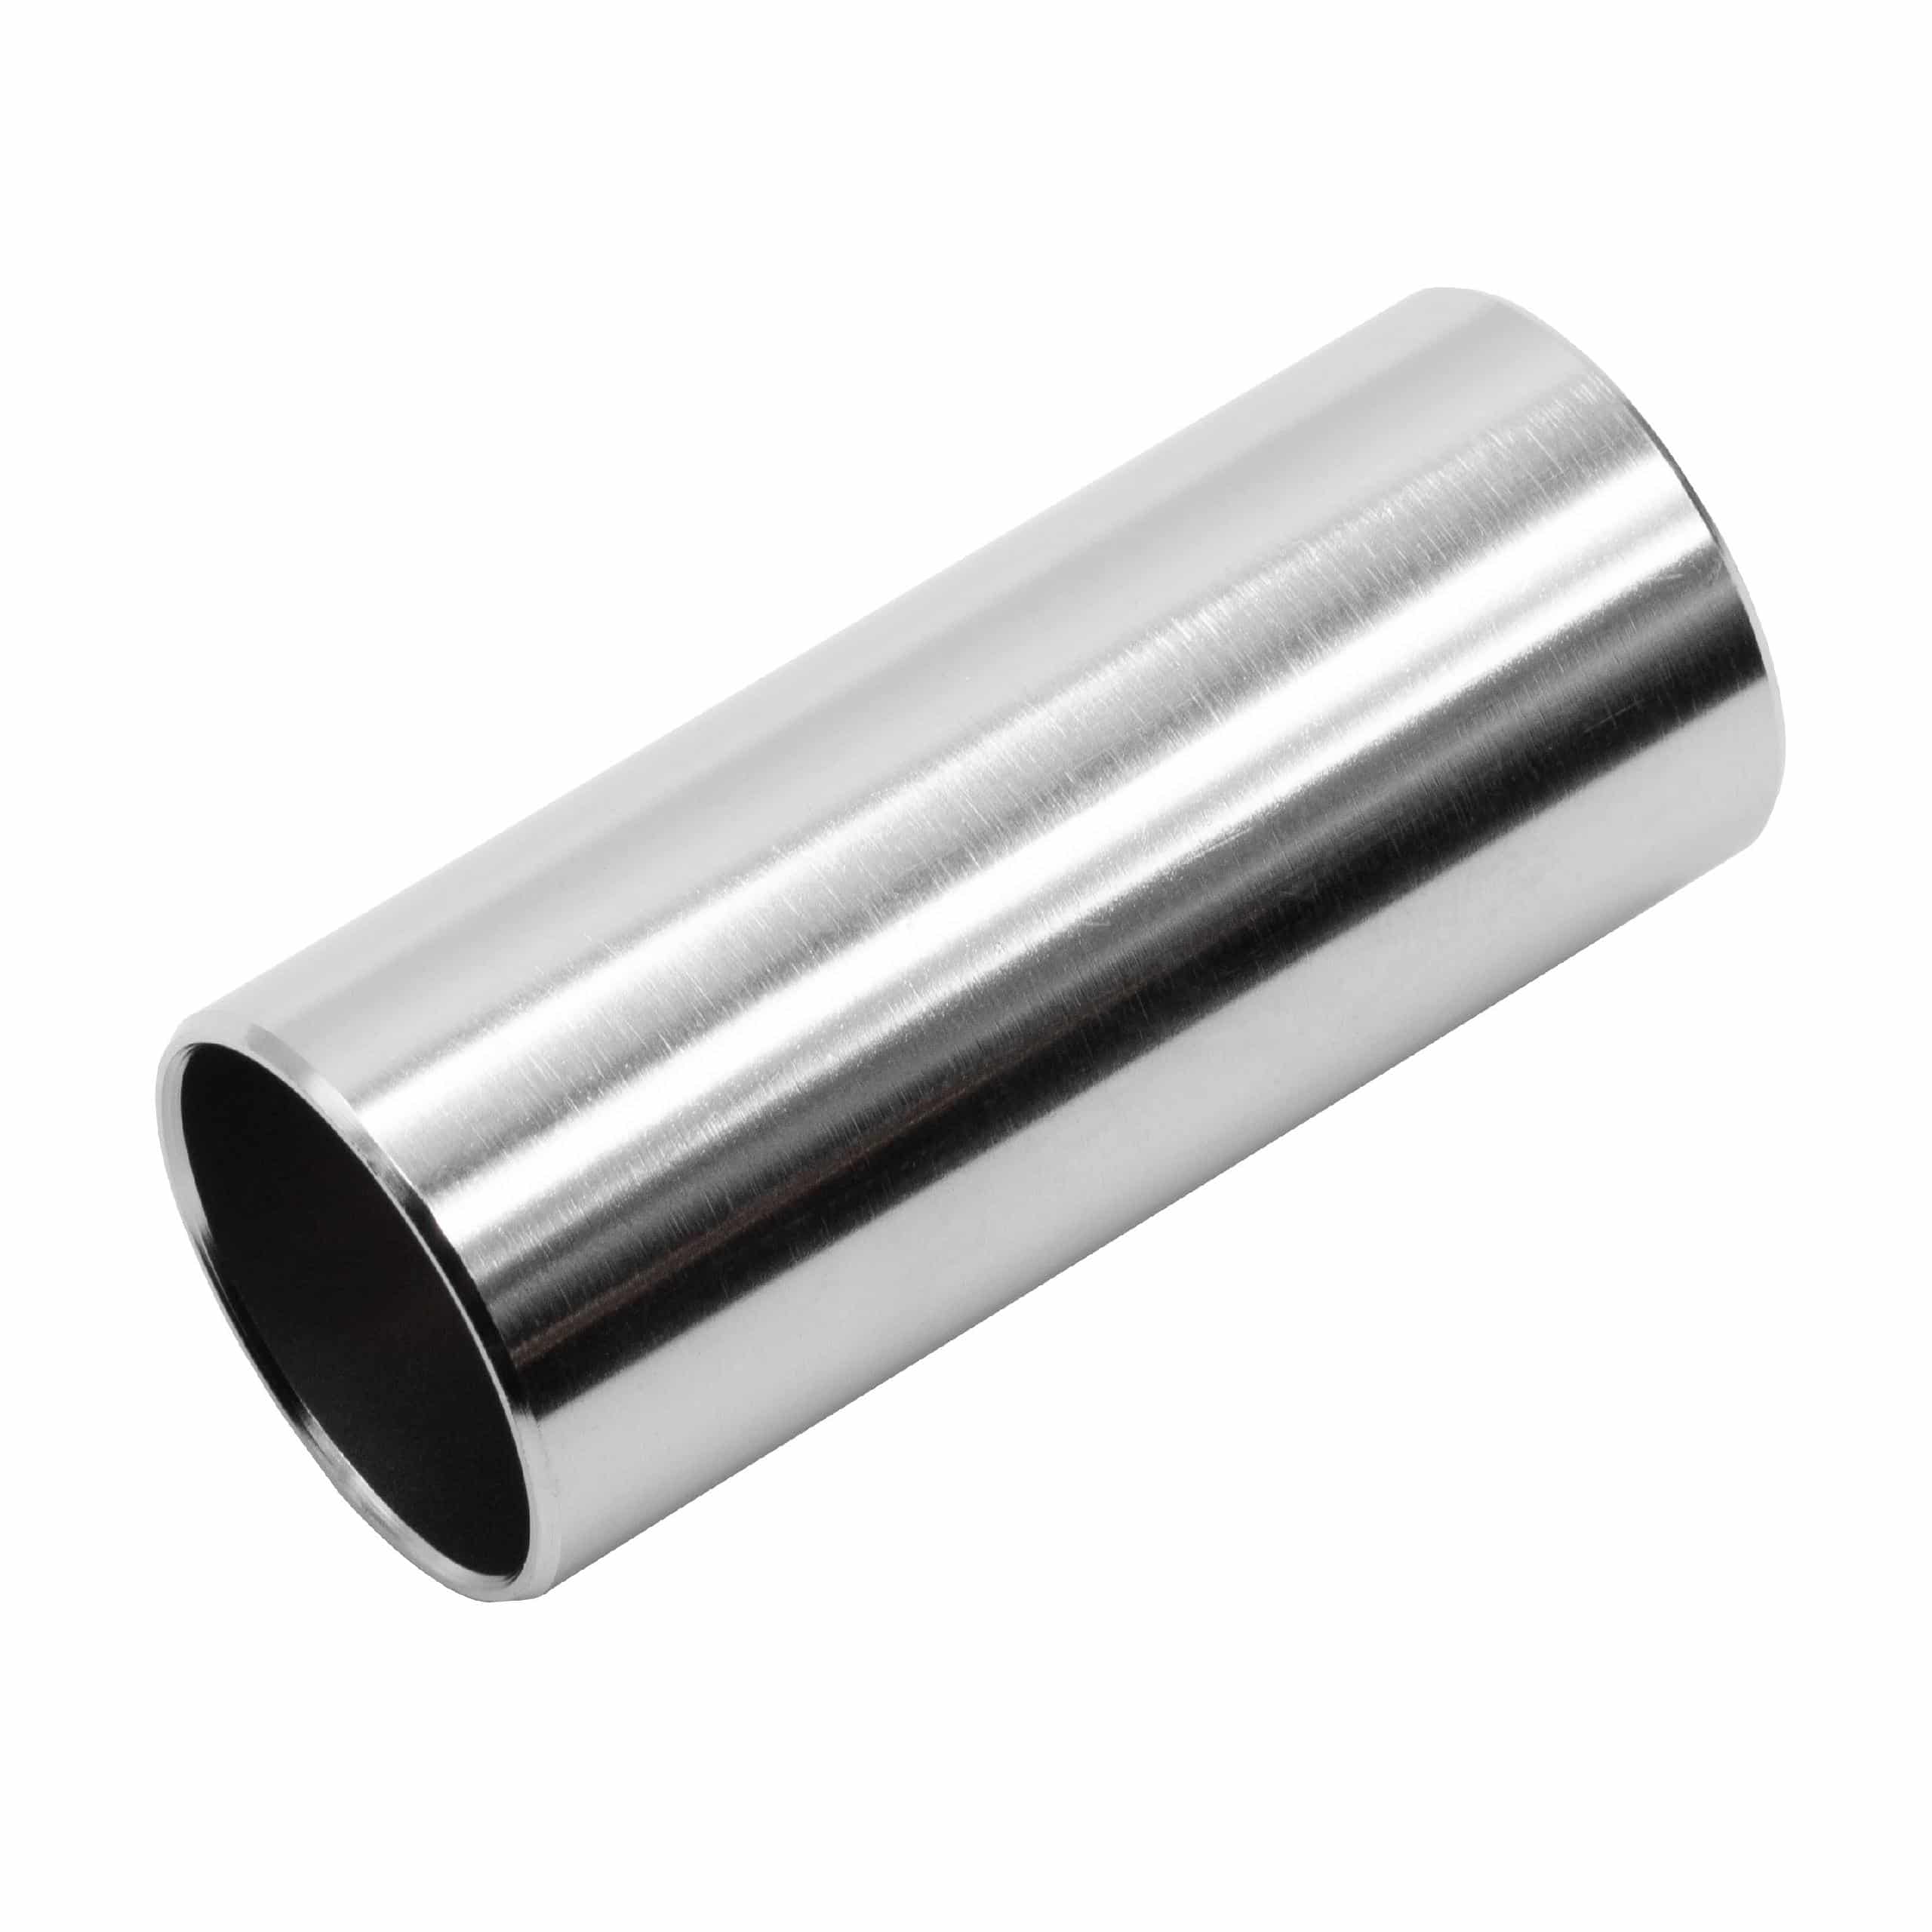 Guitar Slide 59.6mm stainless steel - Solid, Secure Hold